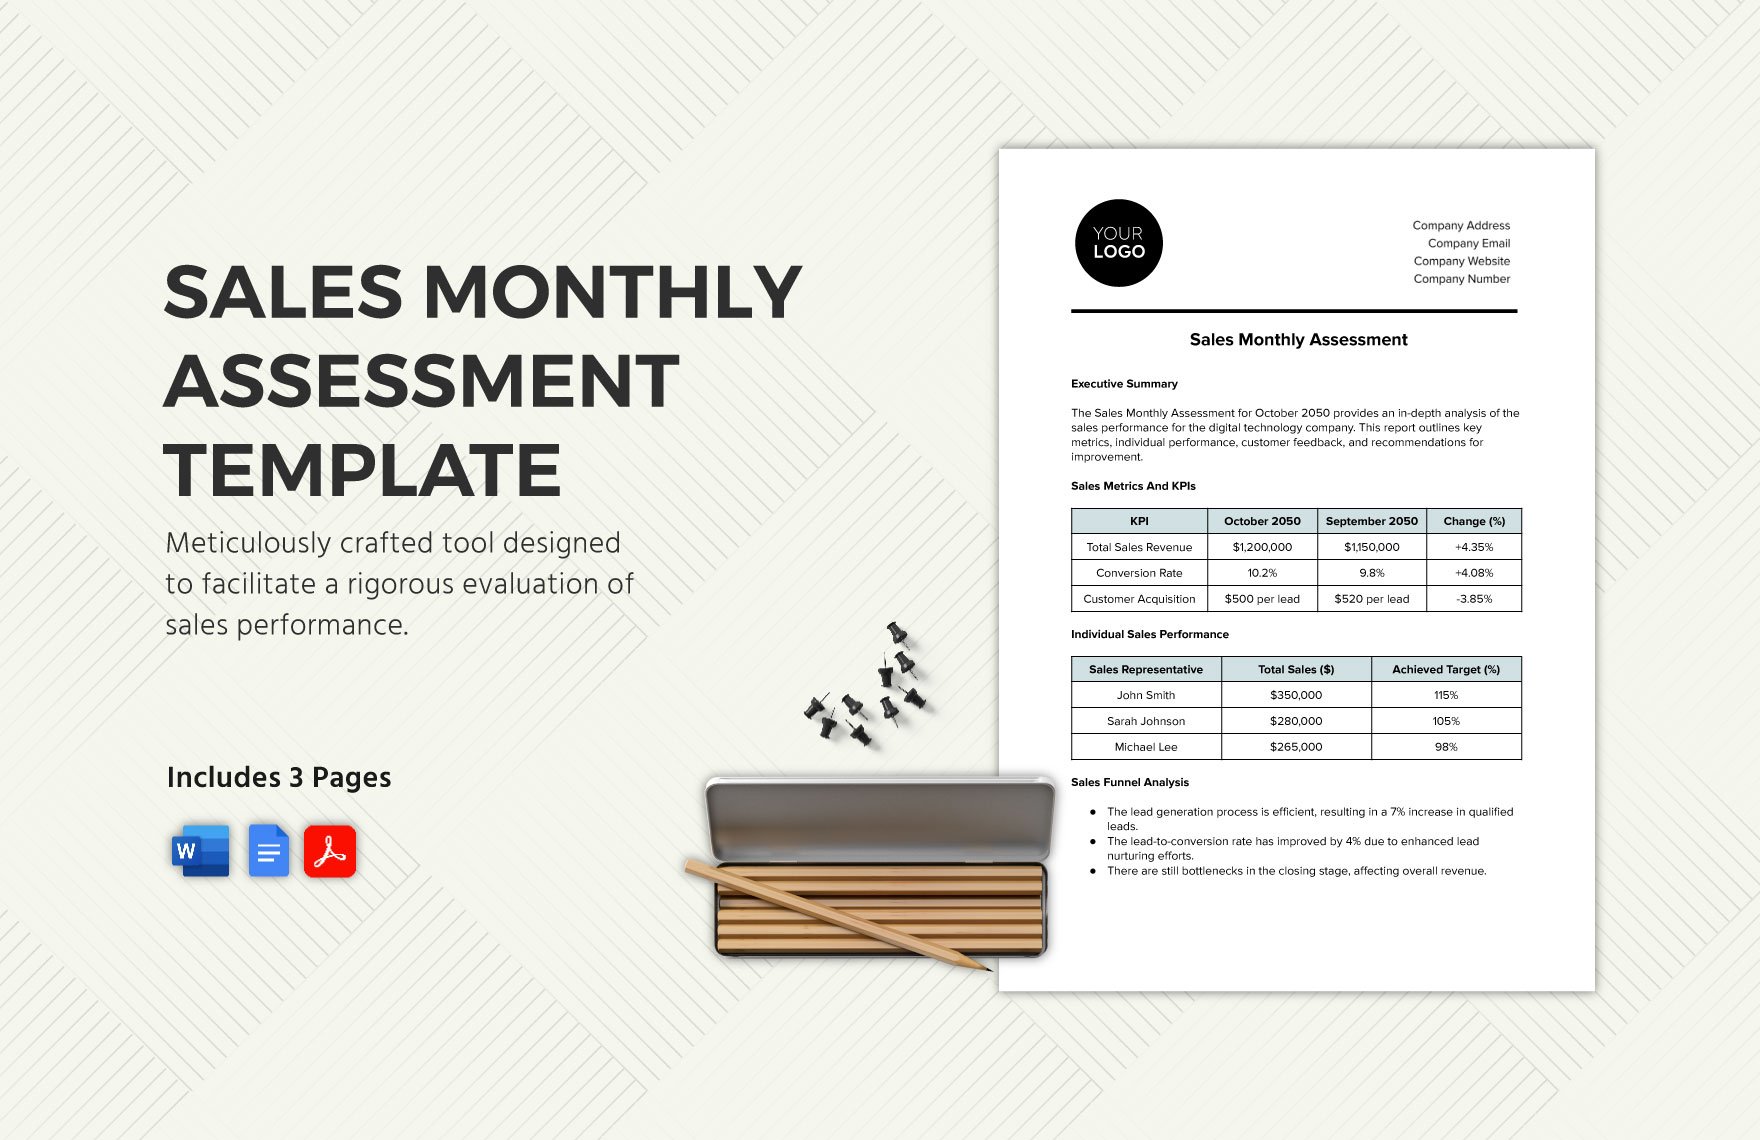 Sales Monthly Assessment Template in Word, Google Docs, PDF